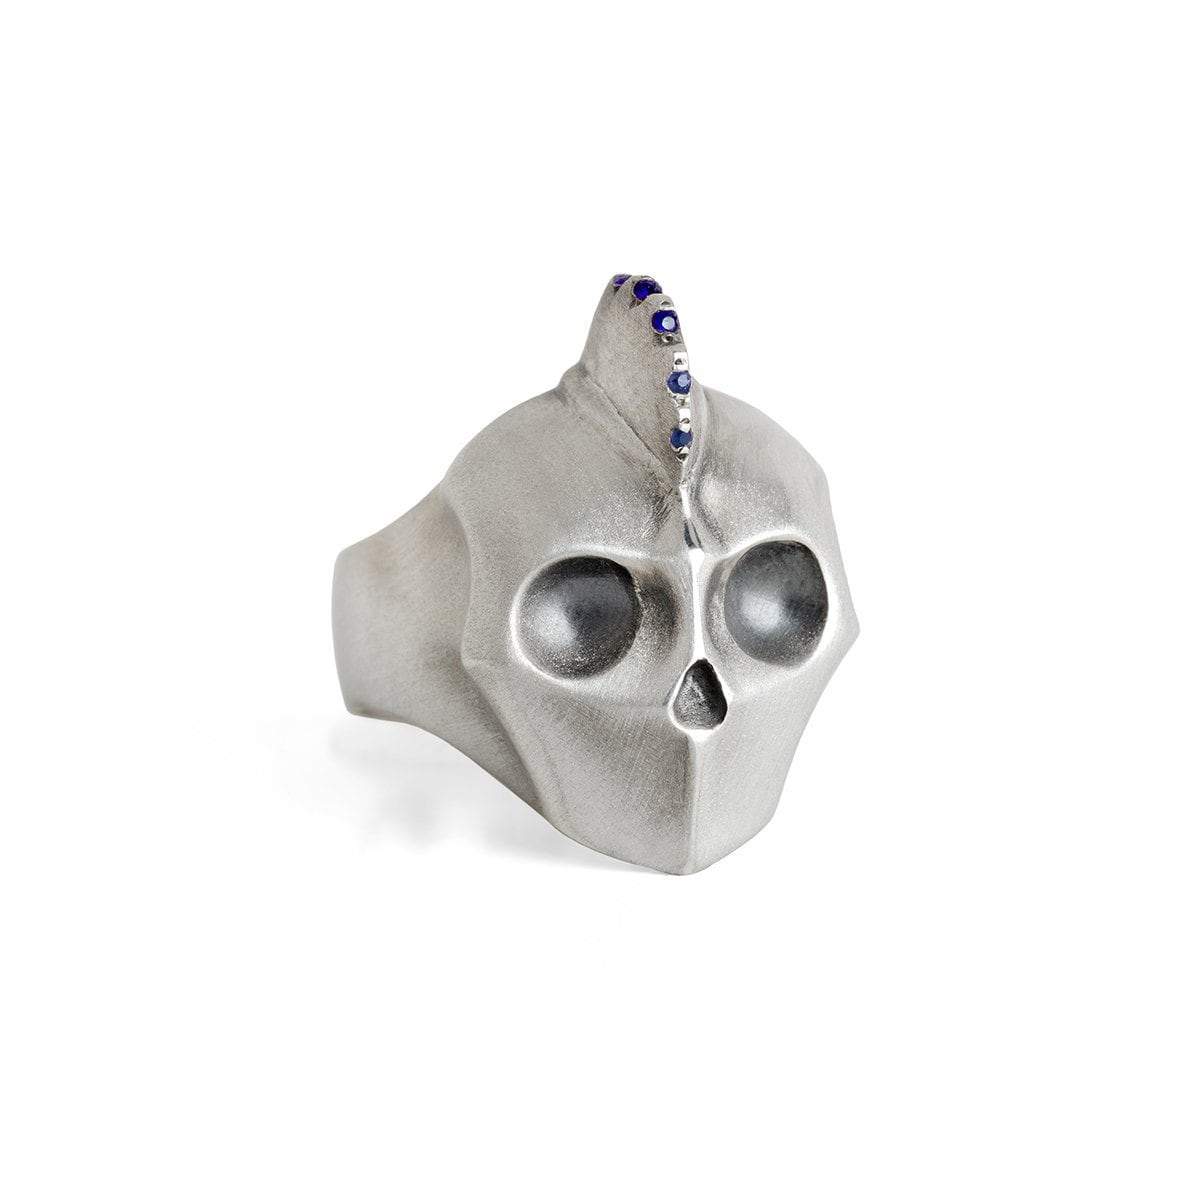 ELINA GLEIZER Select Your Size / blue-sapphire Mohawk Skull with Blue Sapphires setting